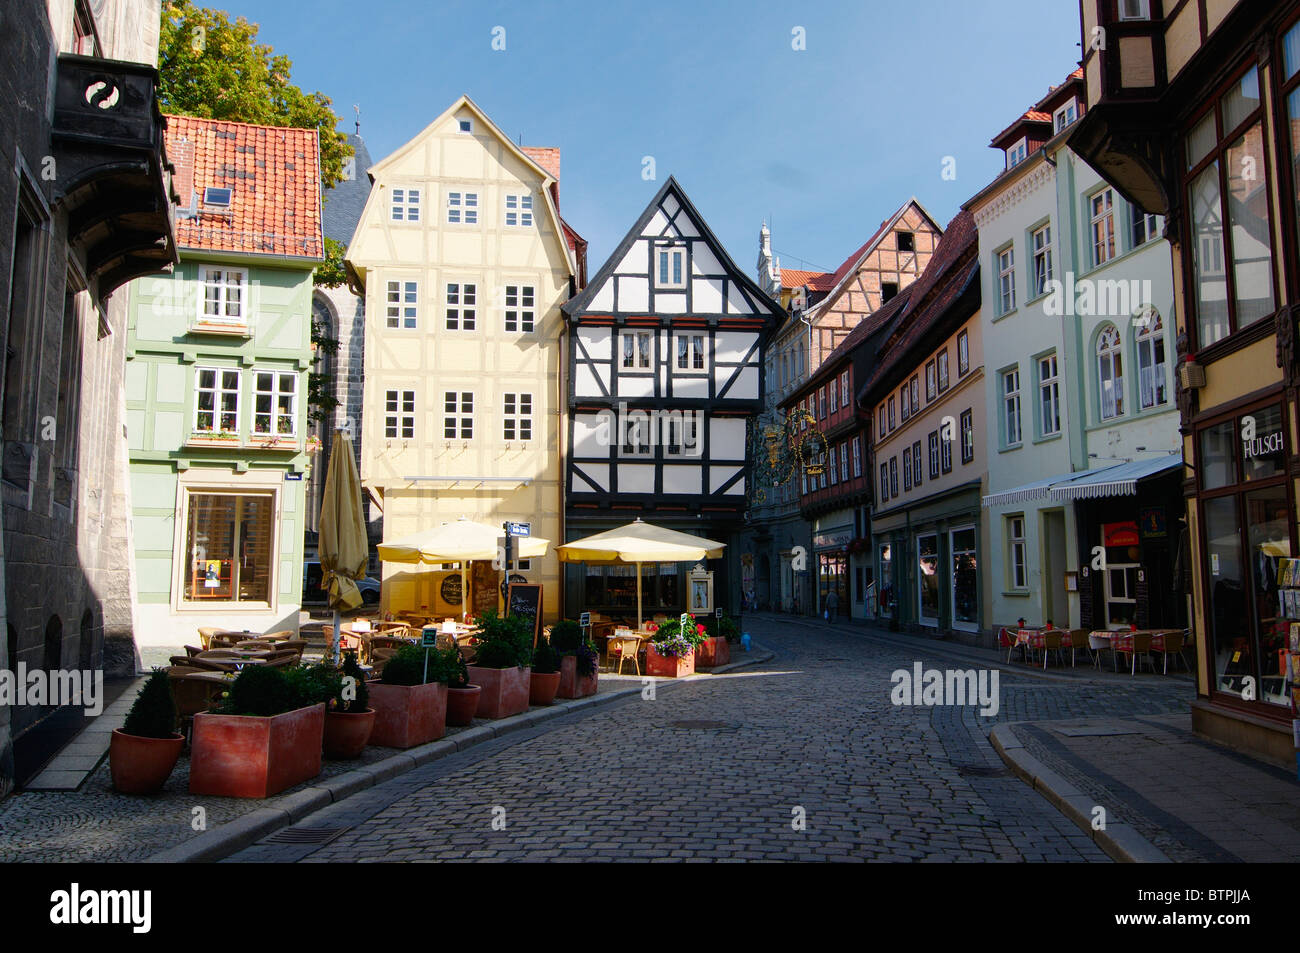 Germany, Harz Mountains, Quedlinburg, Timber-framed houses Stock Photo